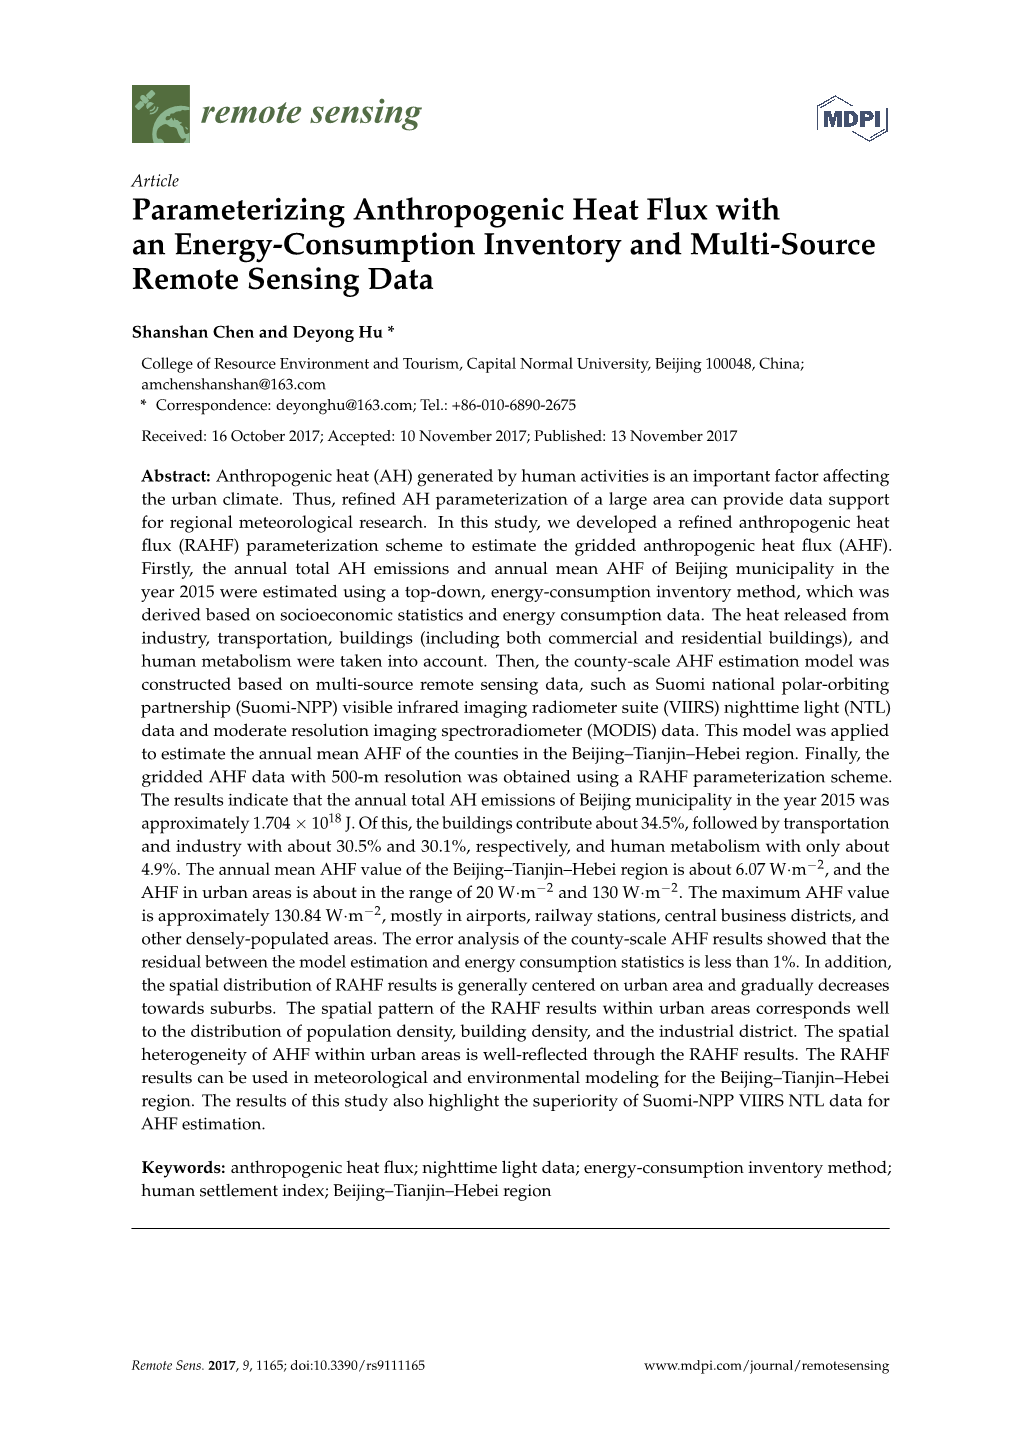 Parameterizing Anthropogenic Heat Flux with an Energy-Consumption Inventory and Multi-Source Remote Sensing Data